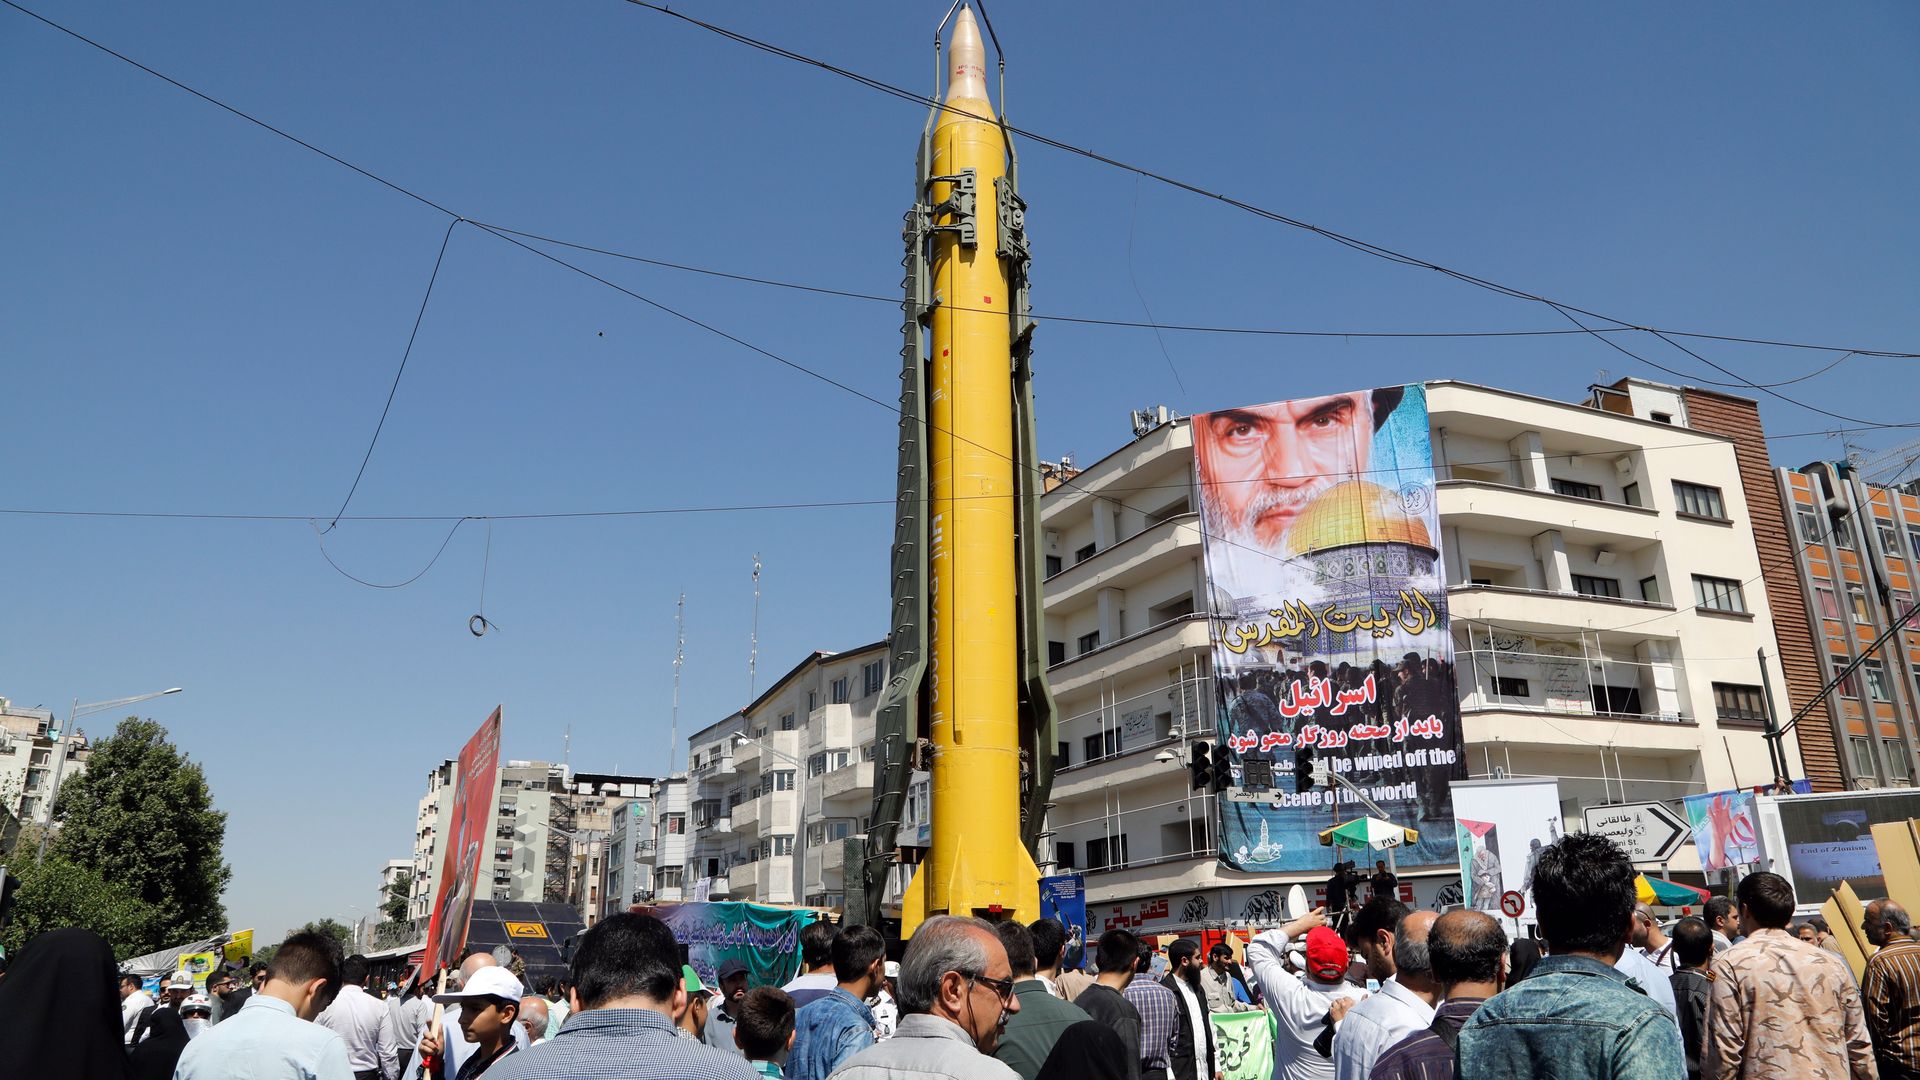 a missile on public display in a city plaza